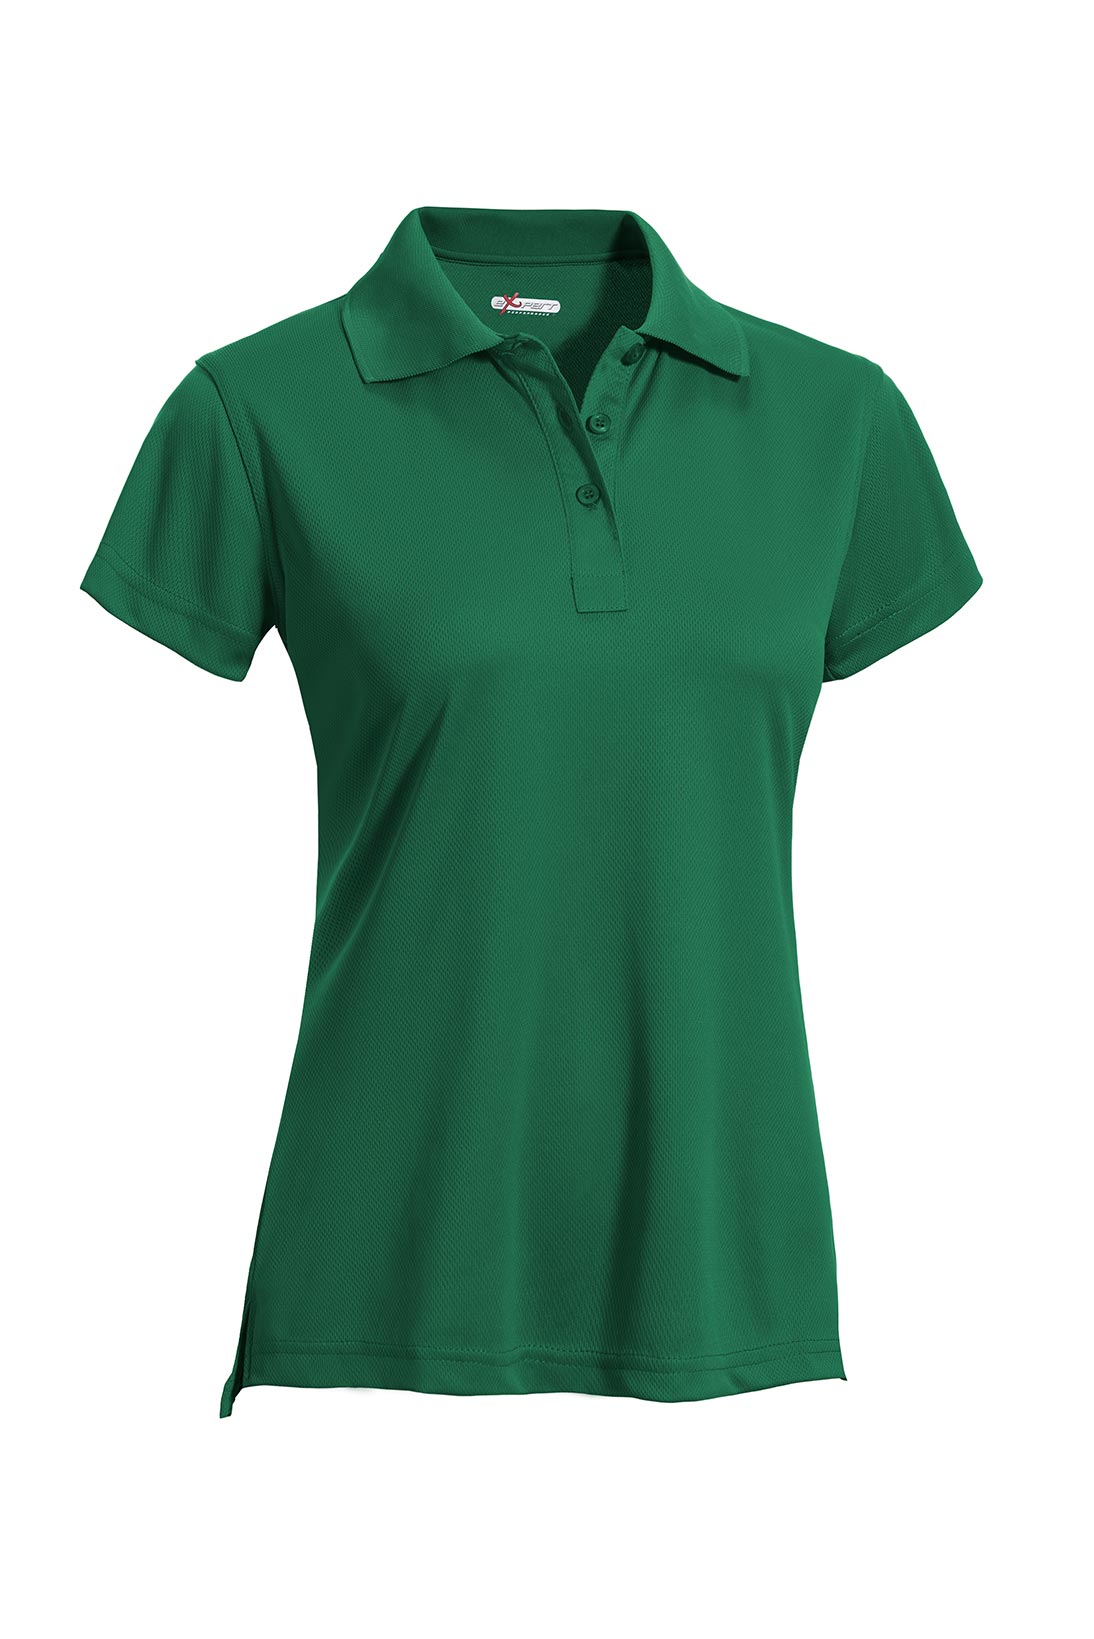 Expert Brand Wholesale Women's Activewear Oxymesh™ City Best Polo in forest green#forest-green